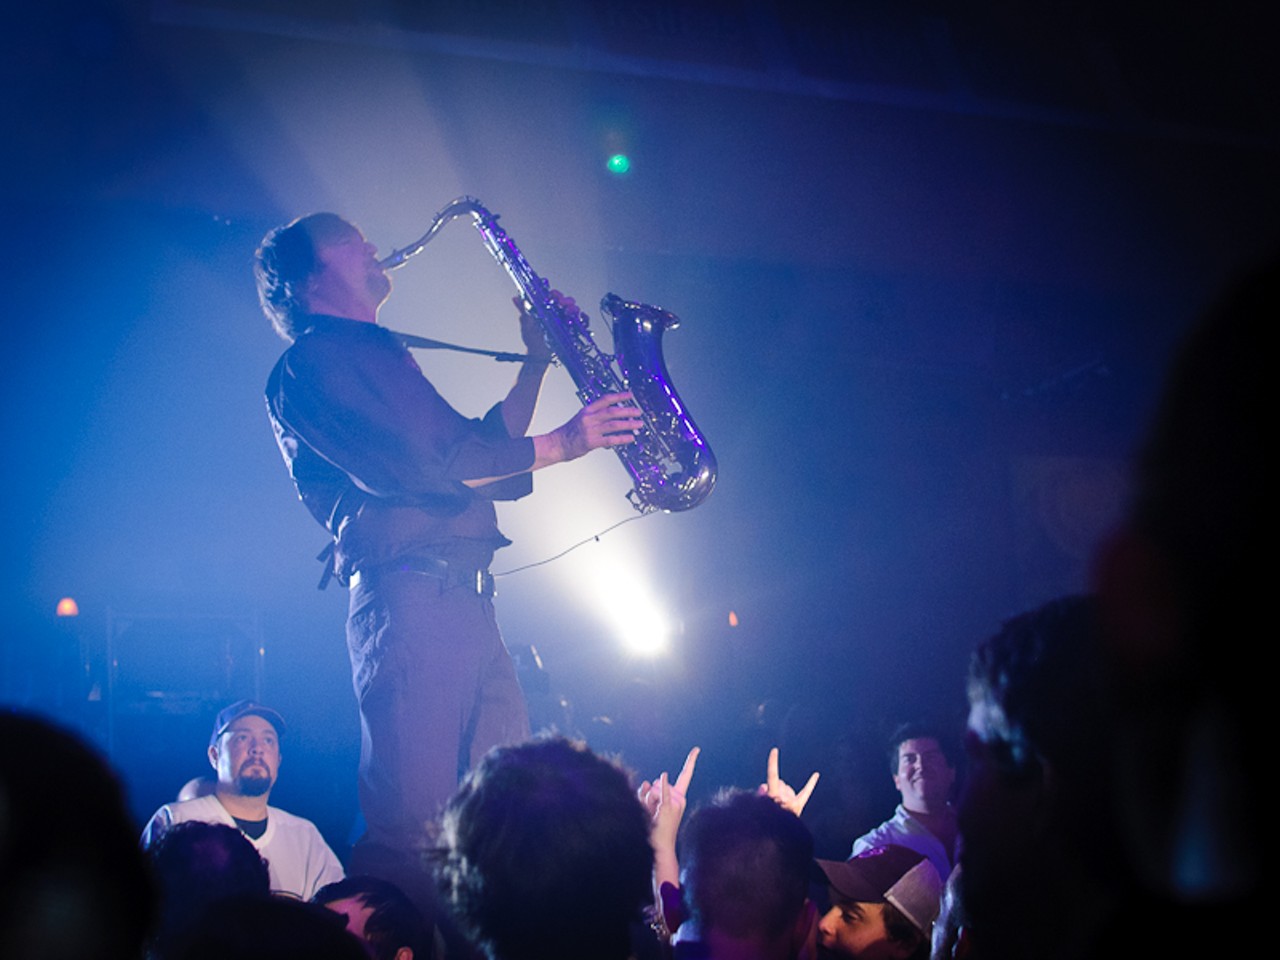 Saxophonist David Farver joined the rest of the band onstage, but not until he'd walked along the tabletops through the crowd.